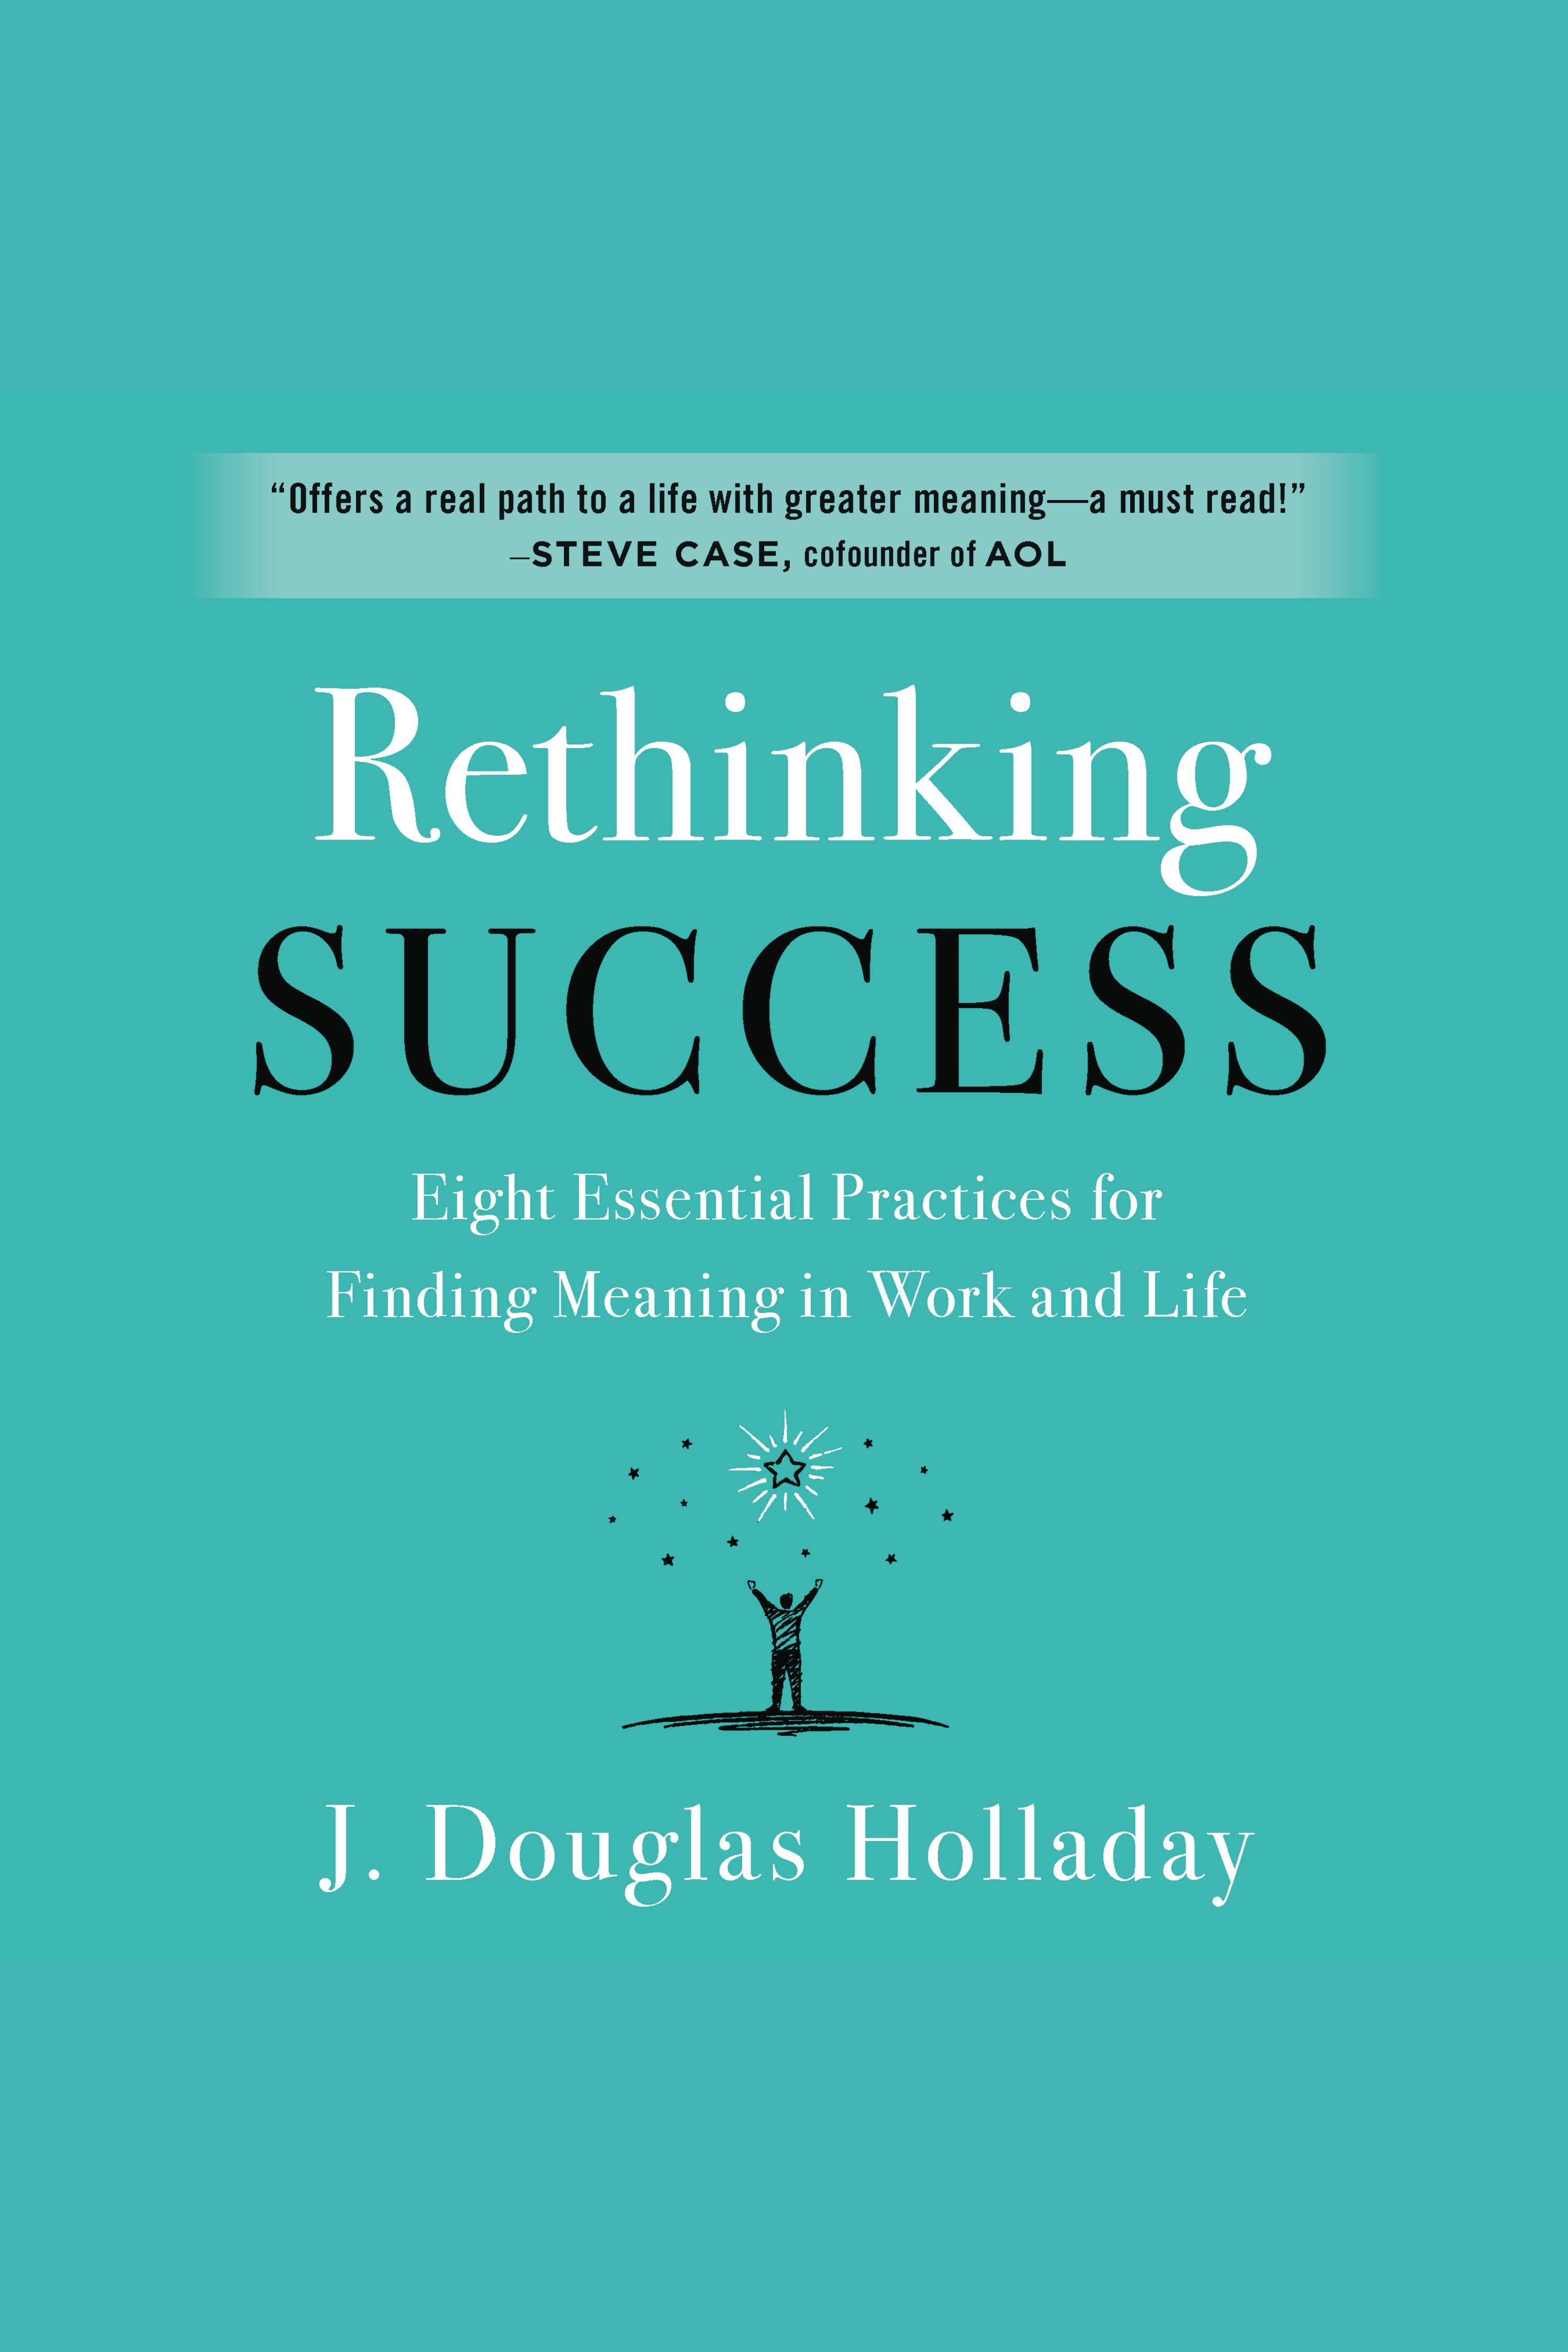 Rethinking Success Eight Essential Practices for Finding Meaning in Work and Life cover image